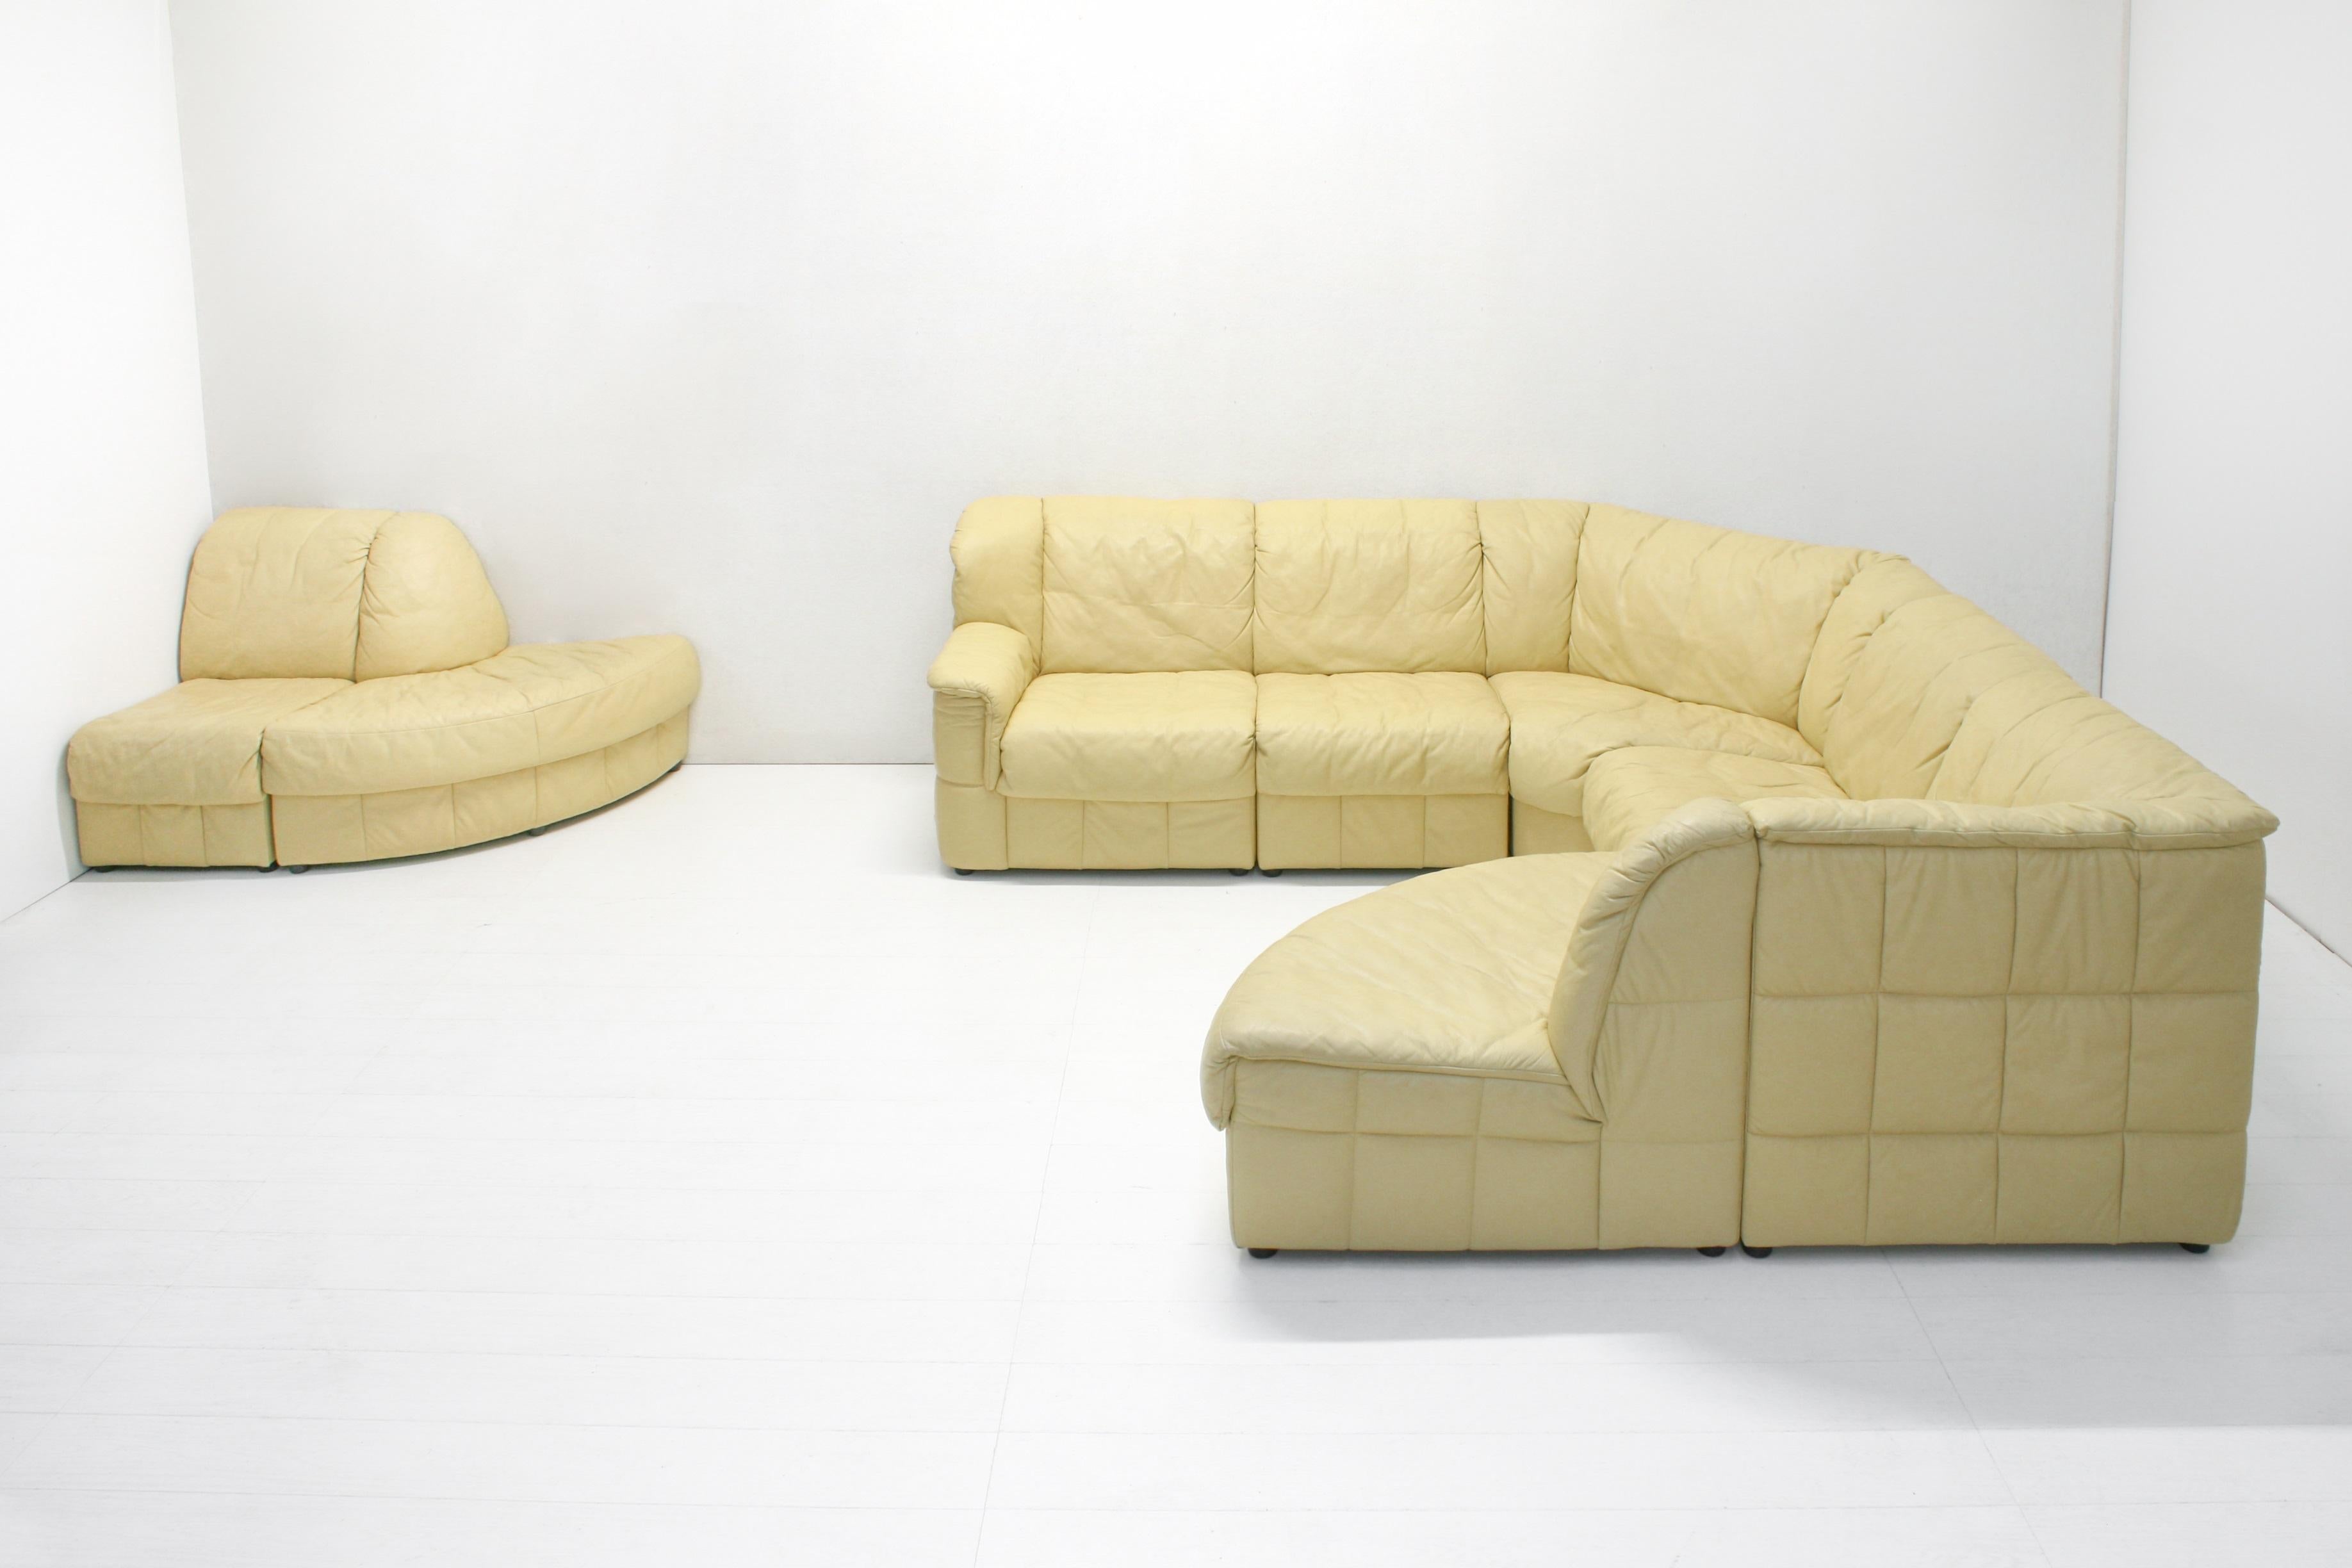 8 Piece Modular Snake Sofa in Yellow Pastel Quilted Leather from Laauser For Sale 2